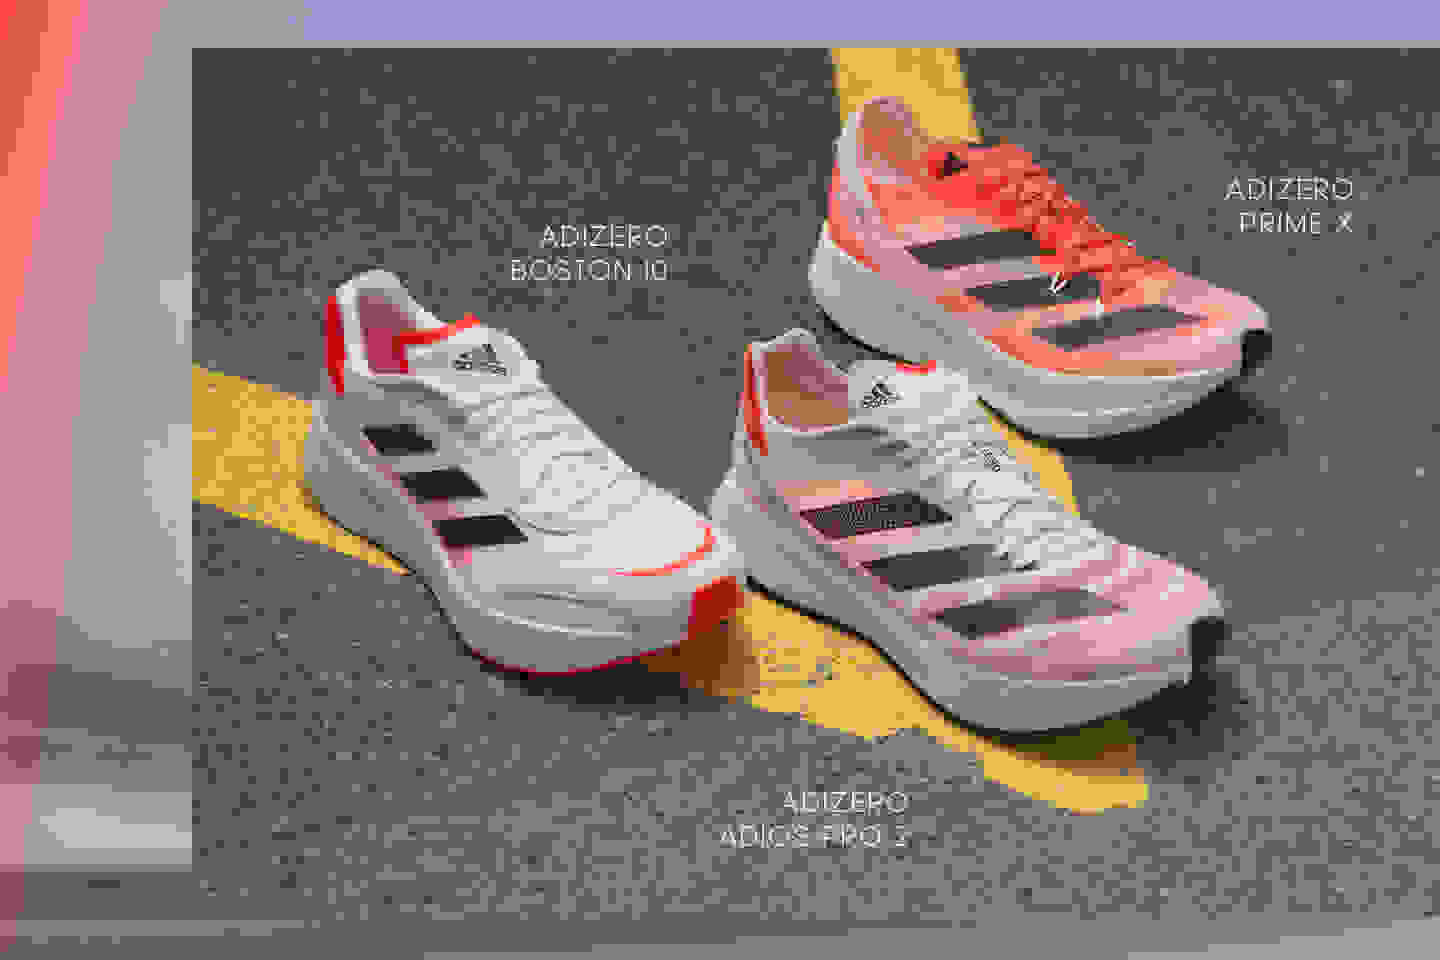 Adizero running shoes on the street with text